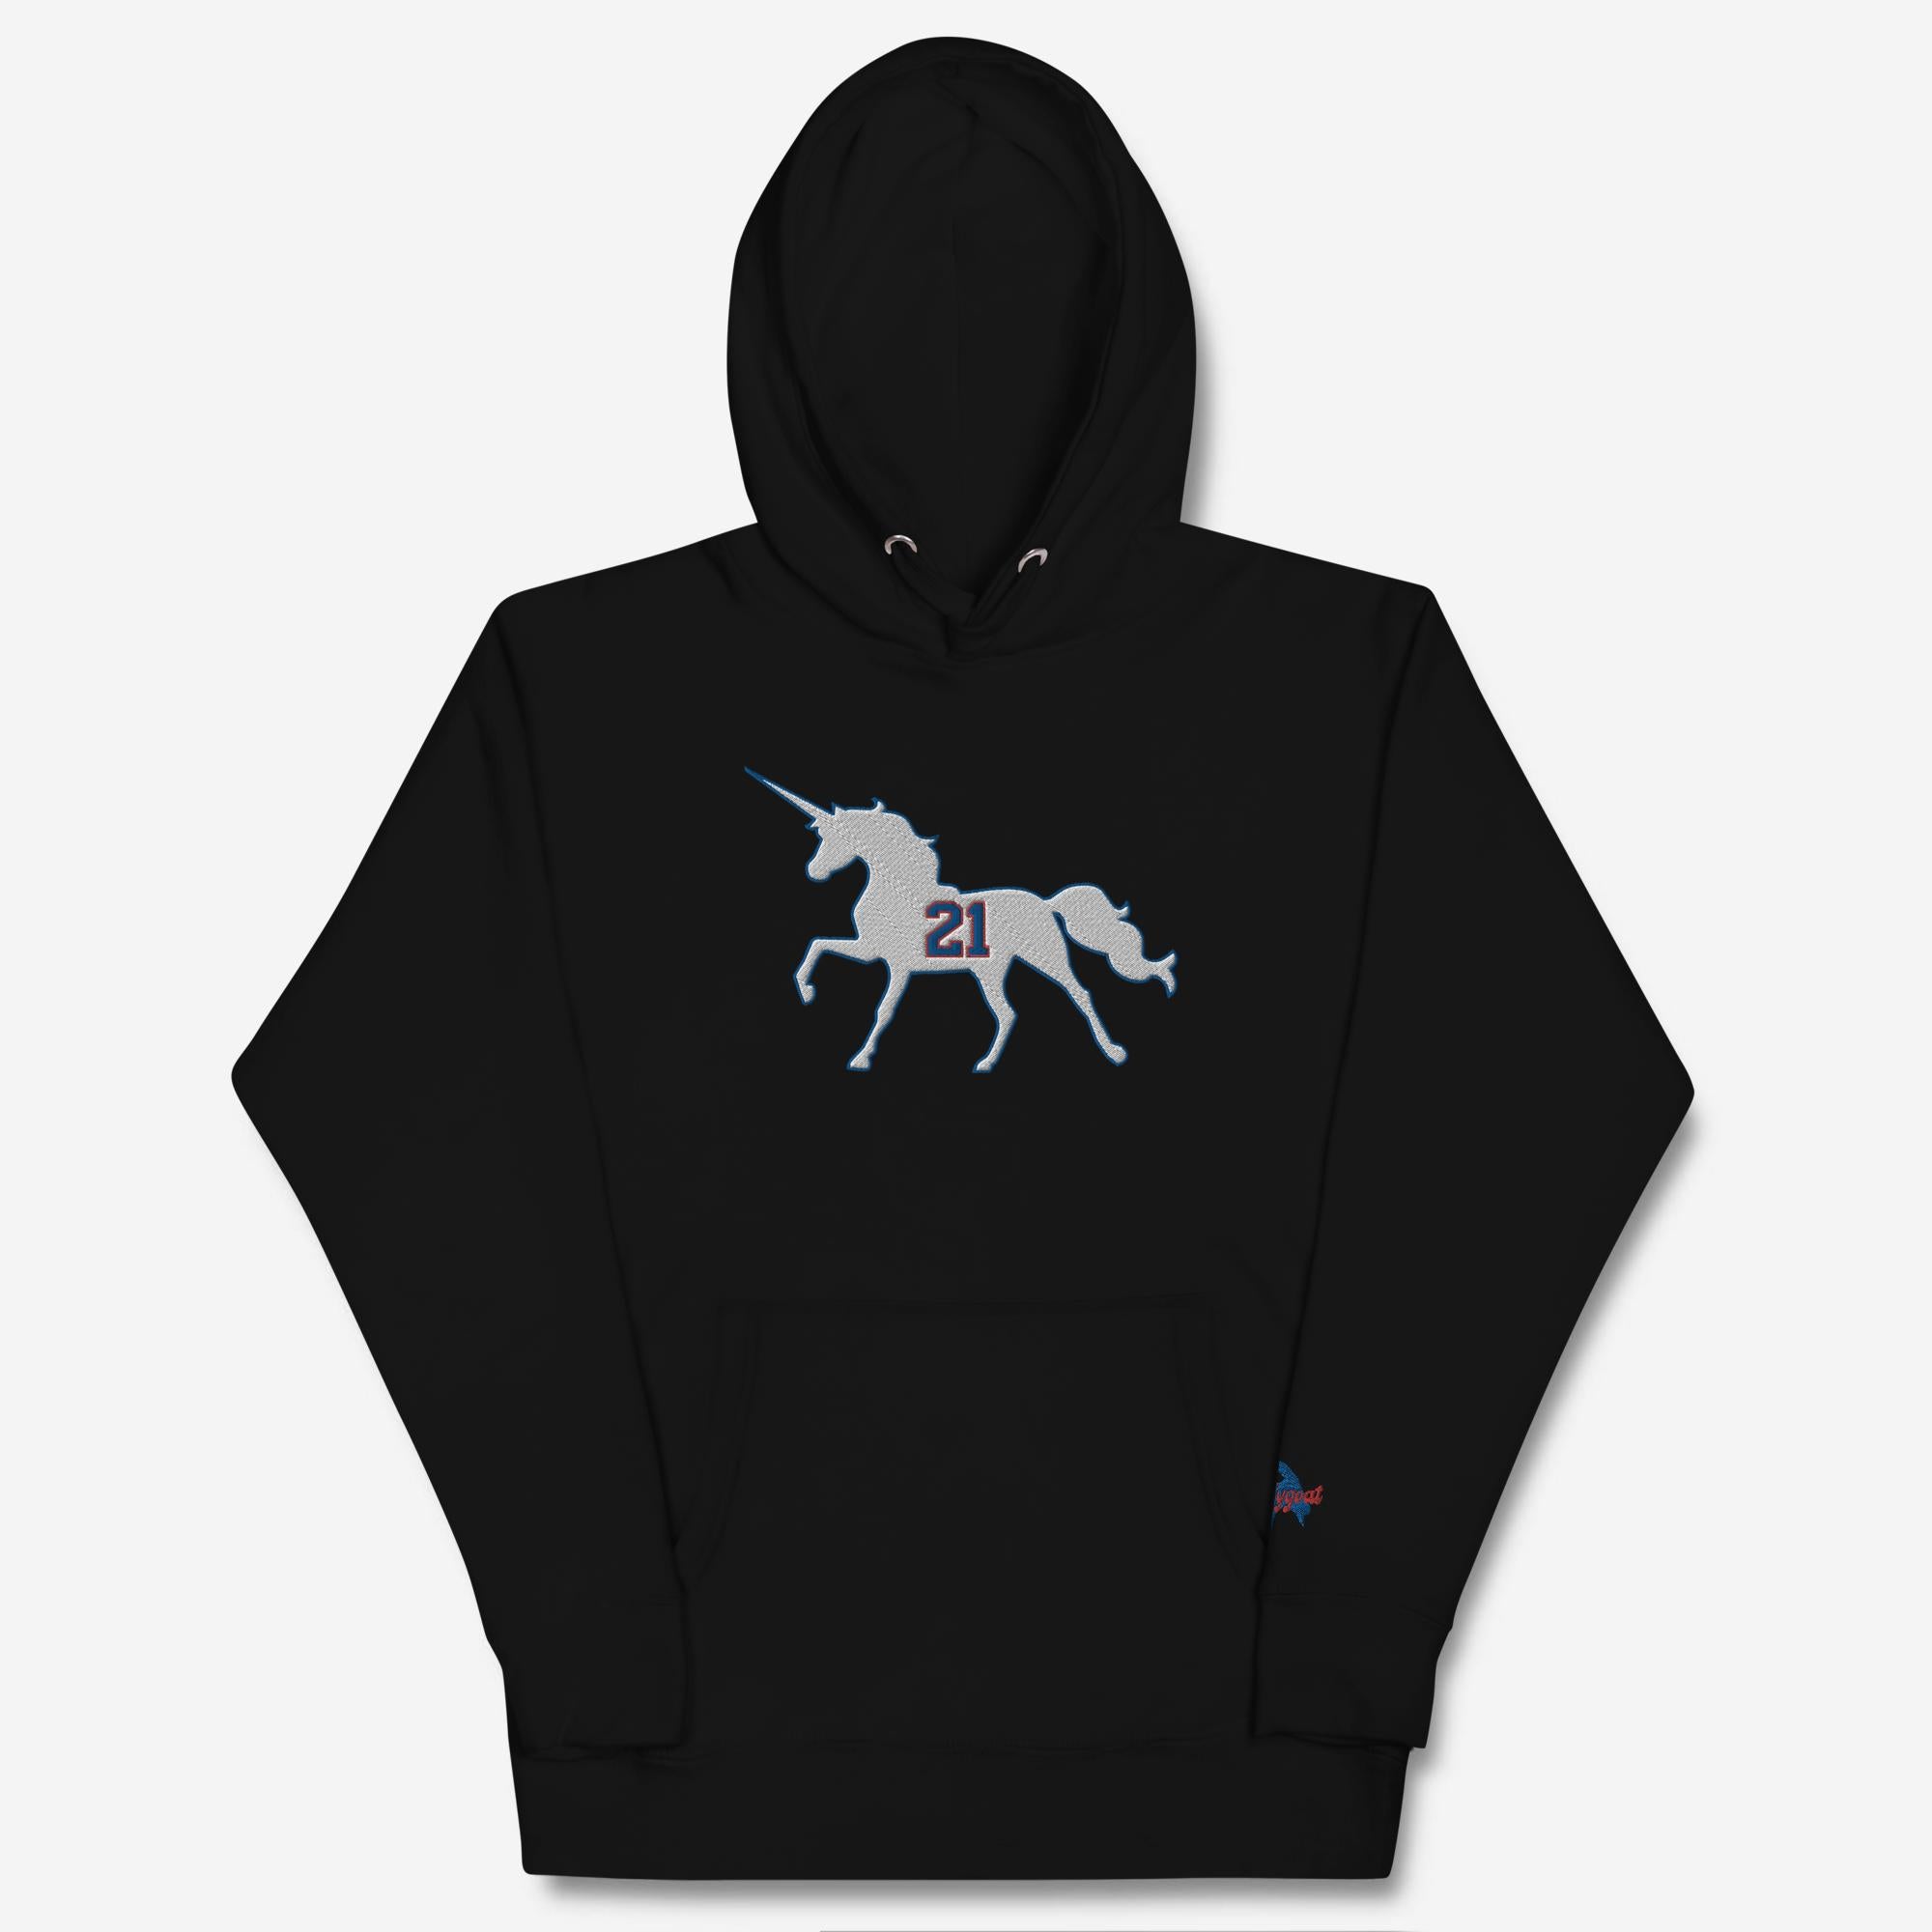 "Embiidicorns Are Real" Embroidered Hoodie